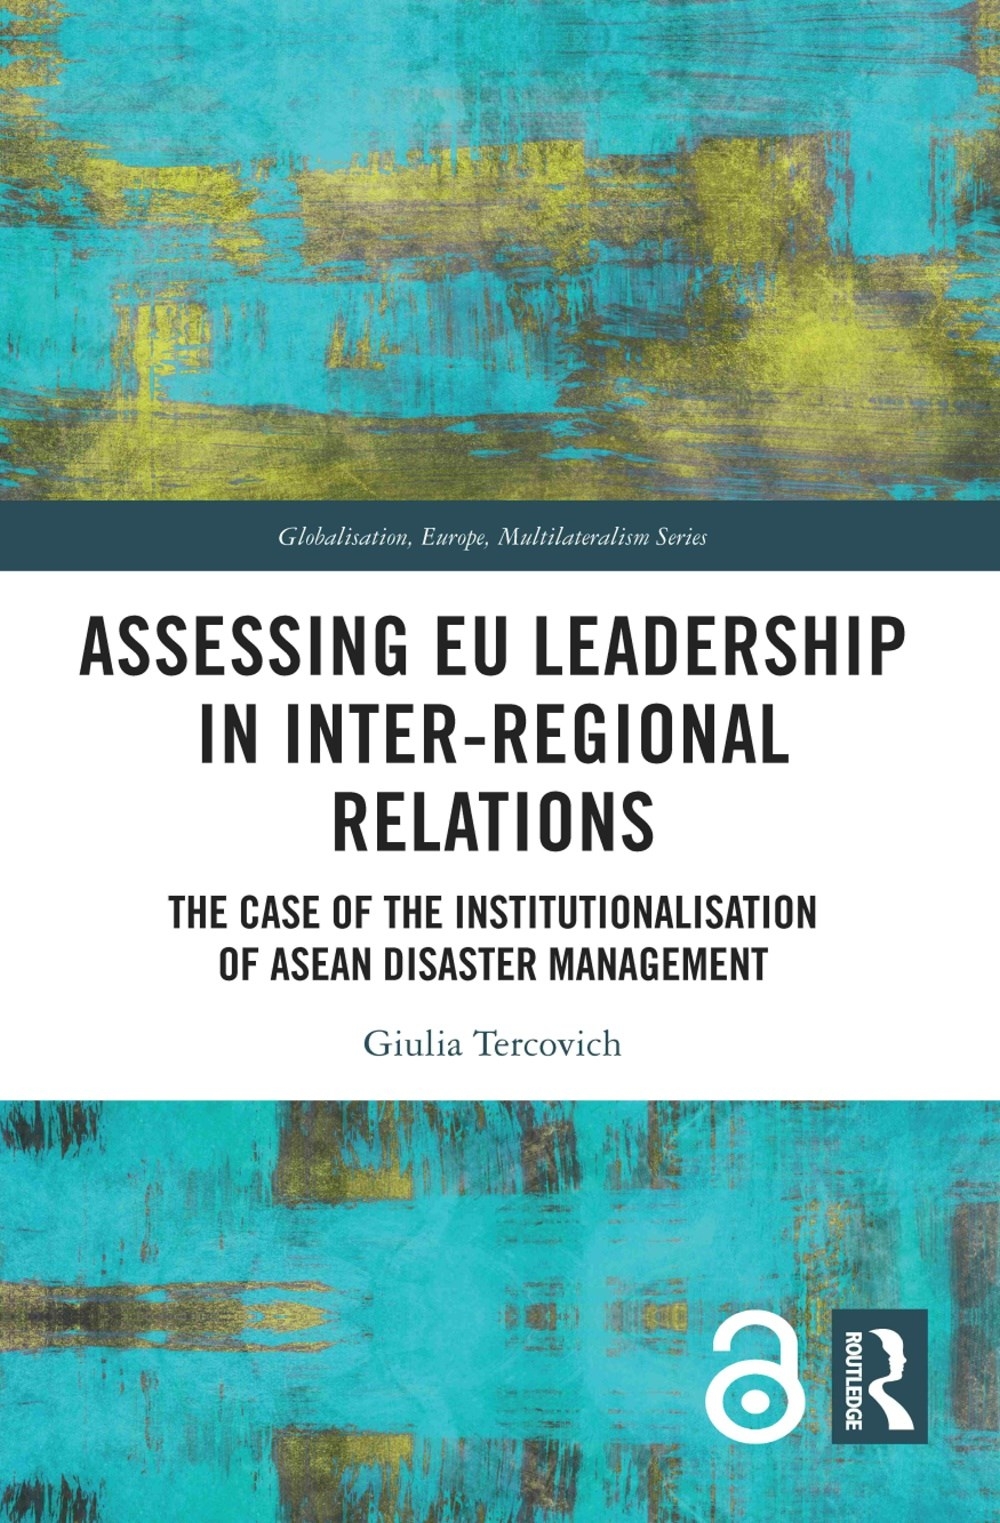 Assessing Eu Leadership in Inter-Regional Relations: The Case of the Institutionalisation of ASEAN Disaster Management